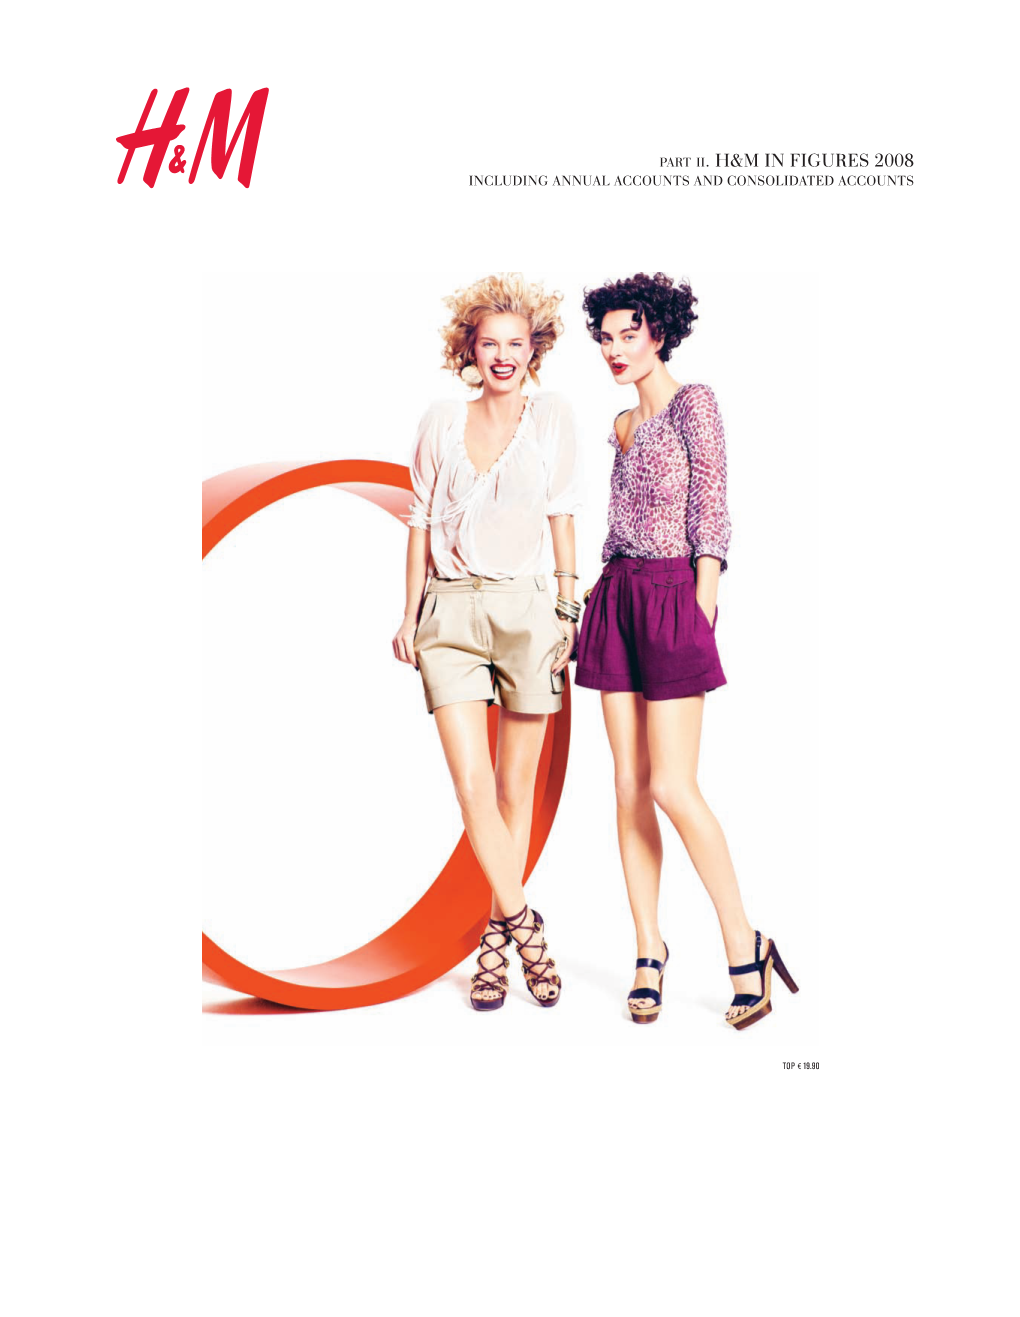 Annual Report 2008 Is in Two Parts: Part I H&M in Words and Pictures 2008 and Part II H&M in Figures 2008 Including the Annual Accounts and Consolidated Accounts